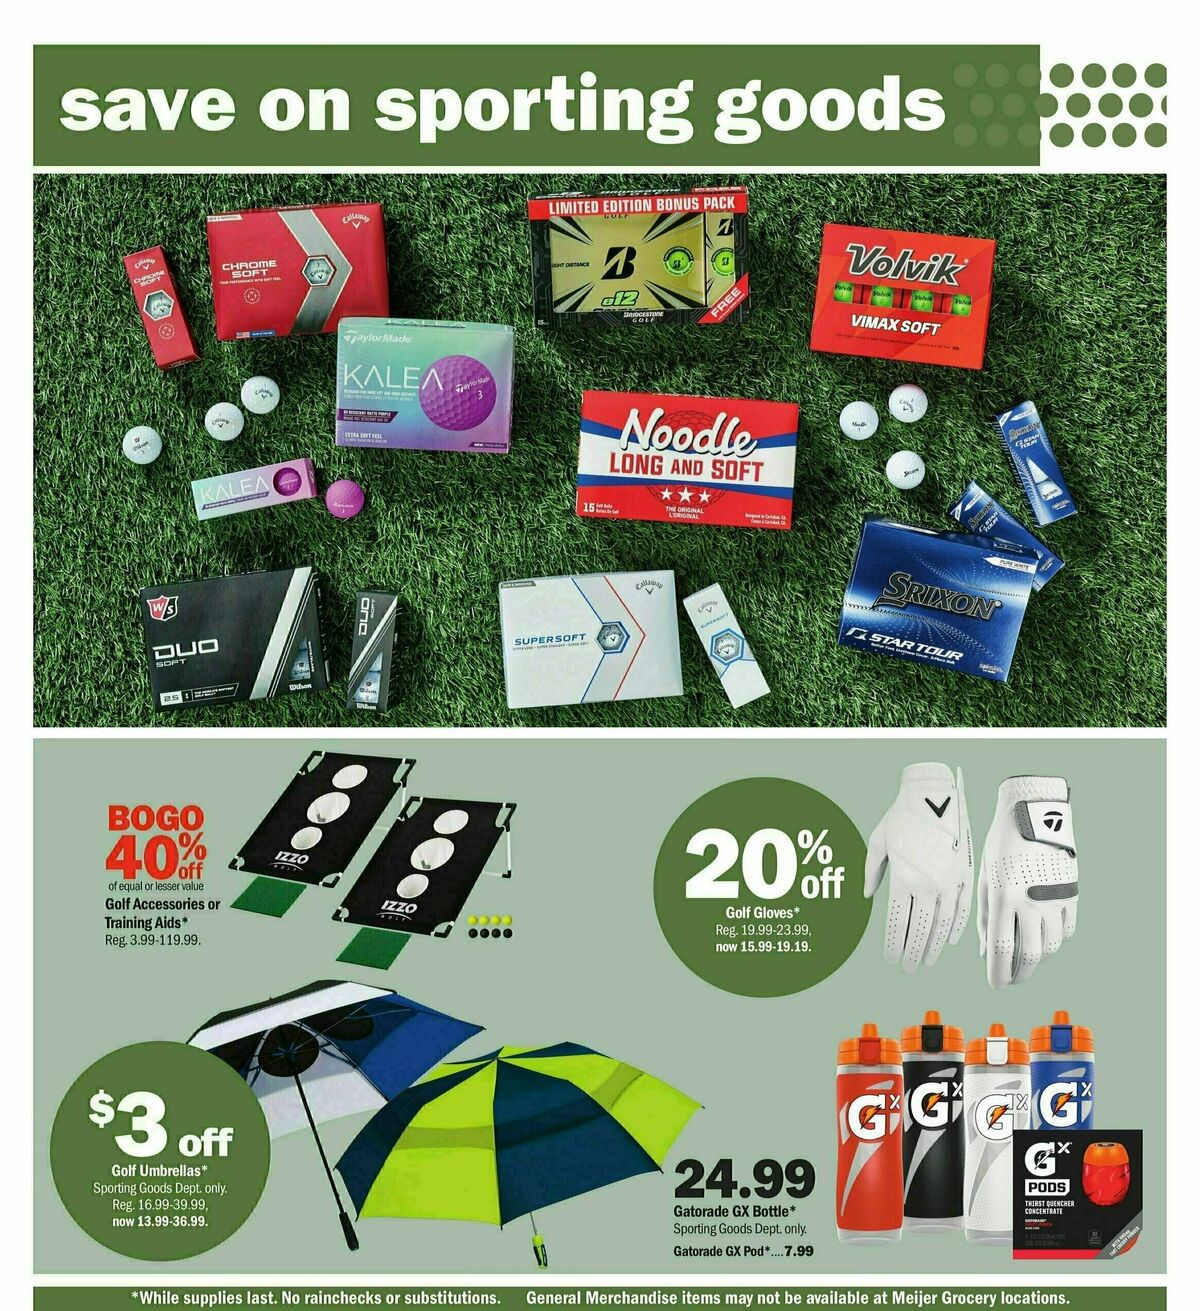 Meijer Get Outside Weekly Ad from April 21